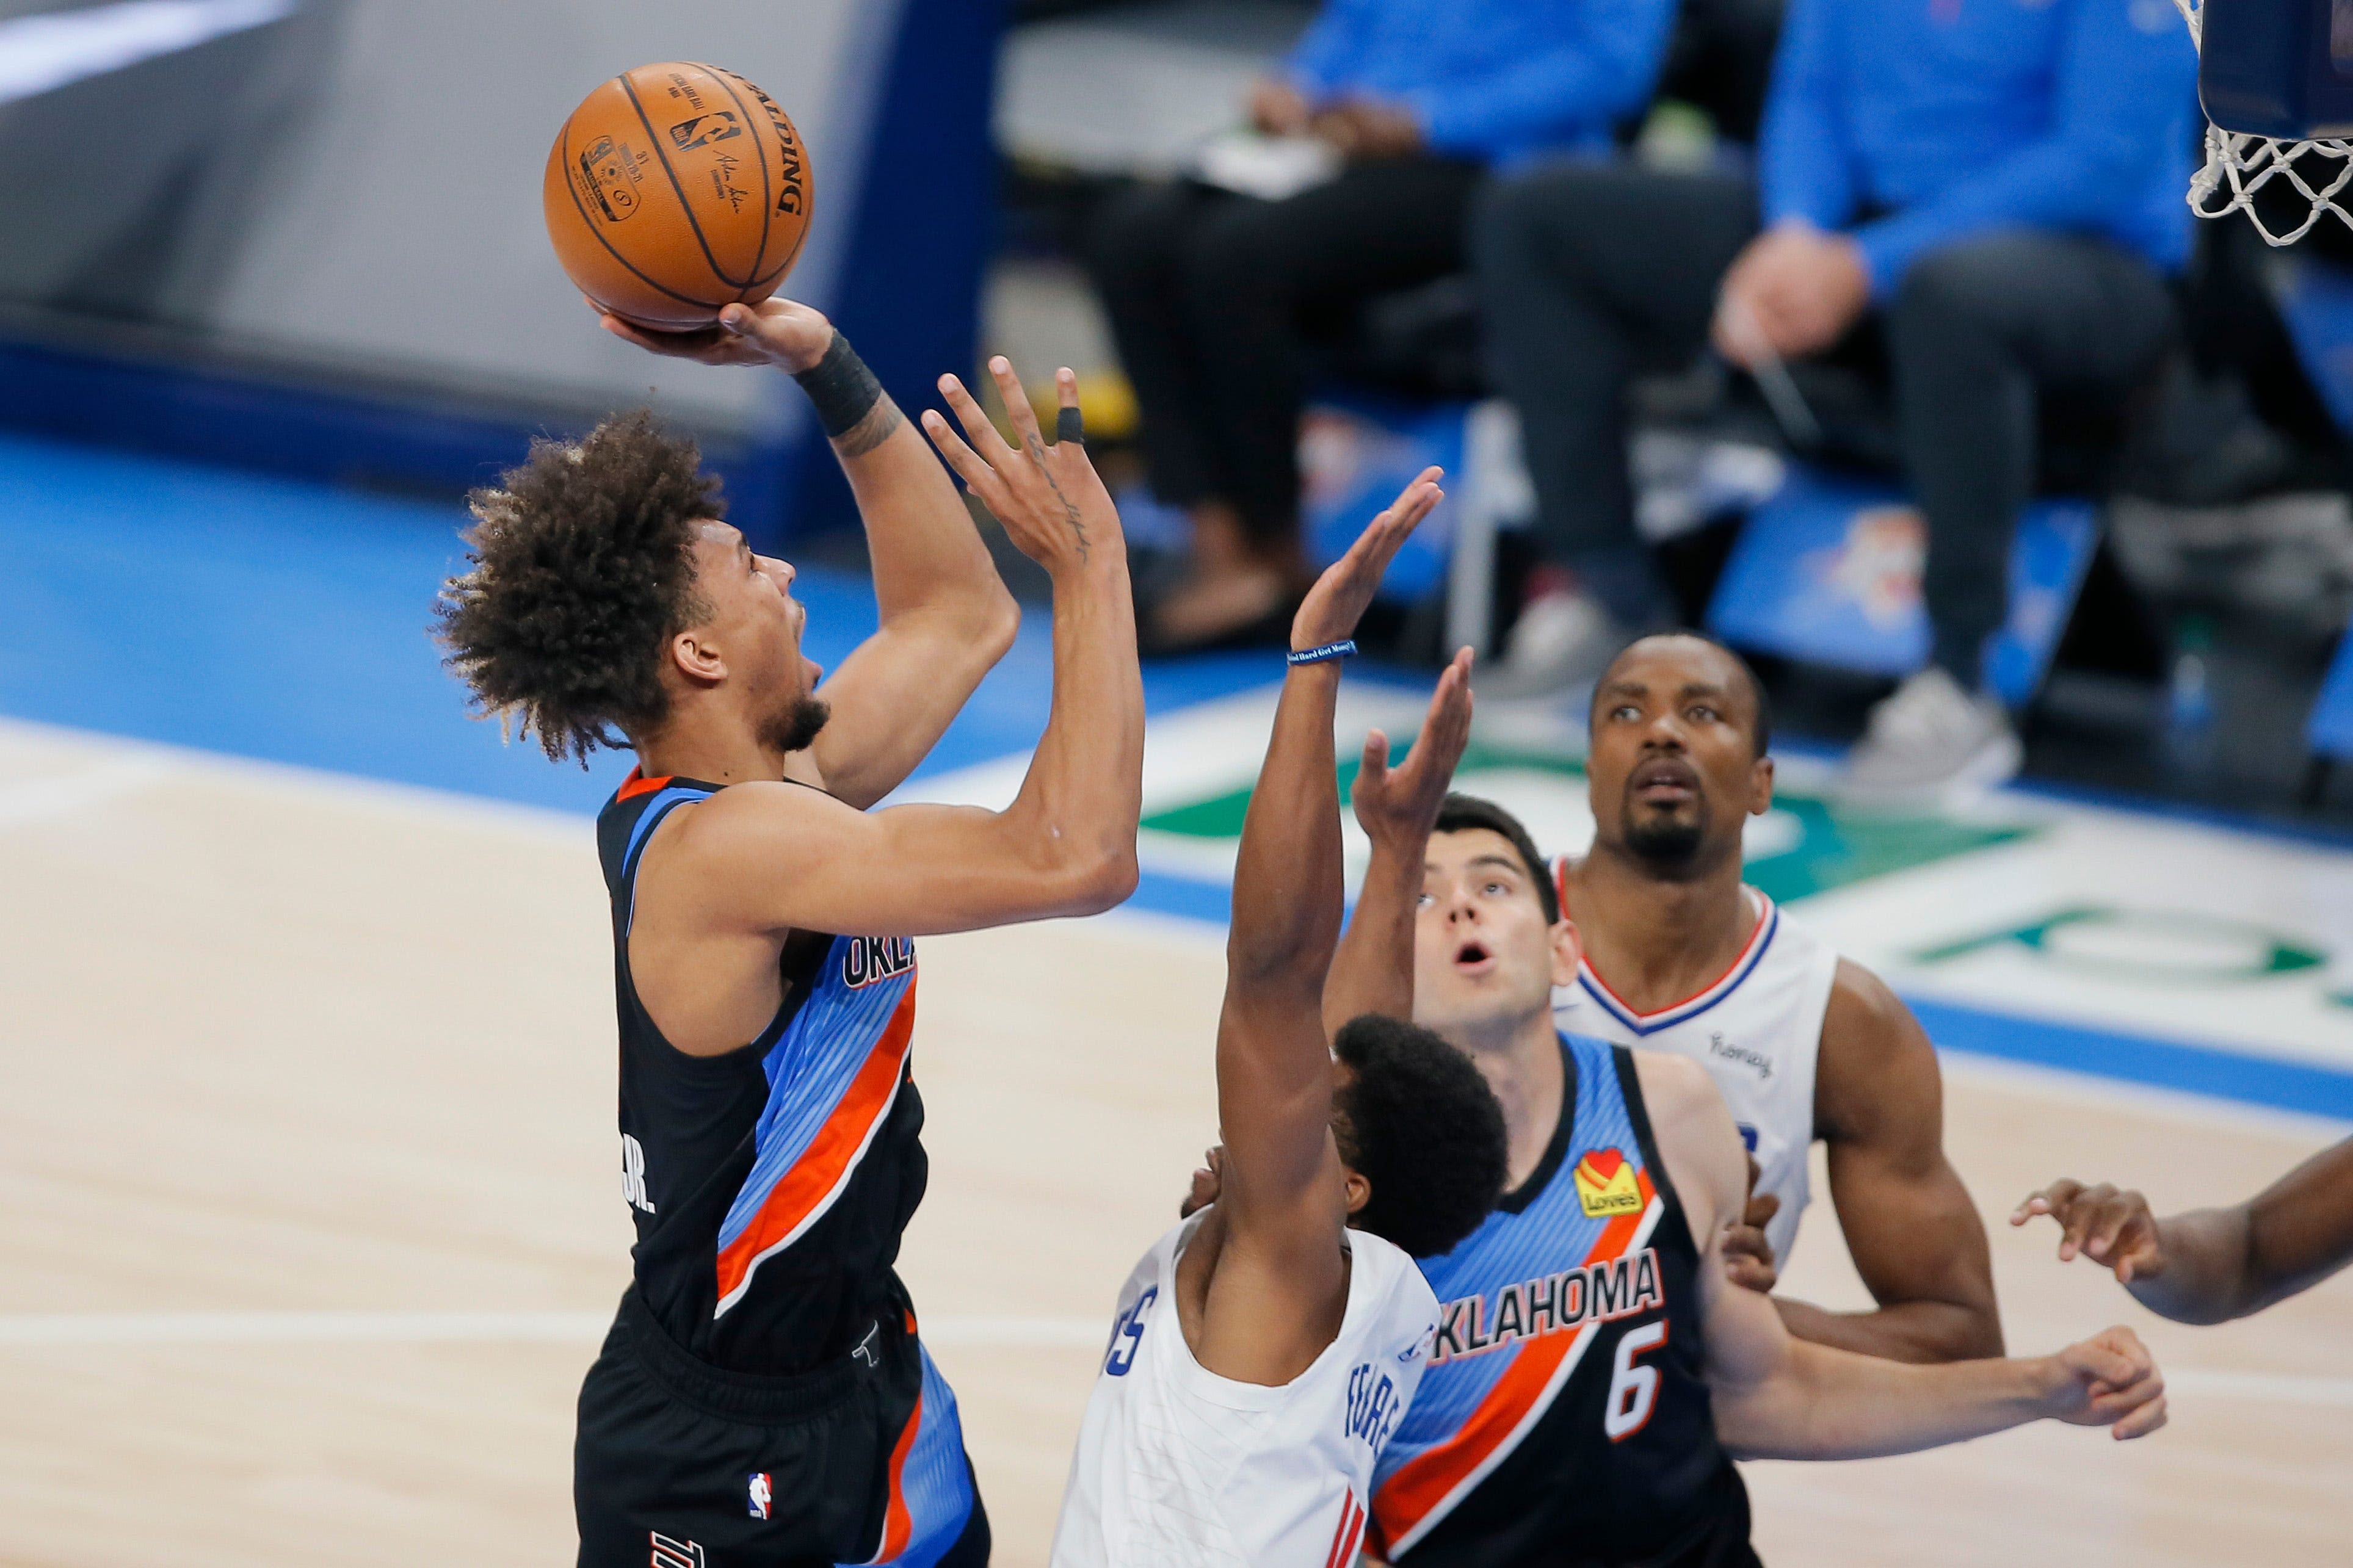 Mussatto: Let's raise a glass to OKC Thunder's all-time rebuilding team